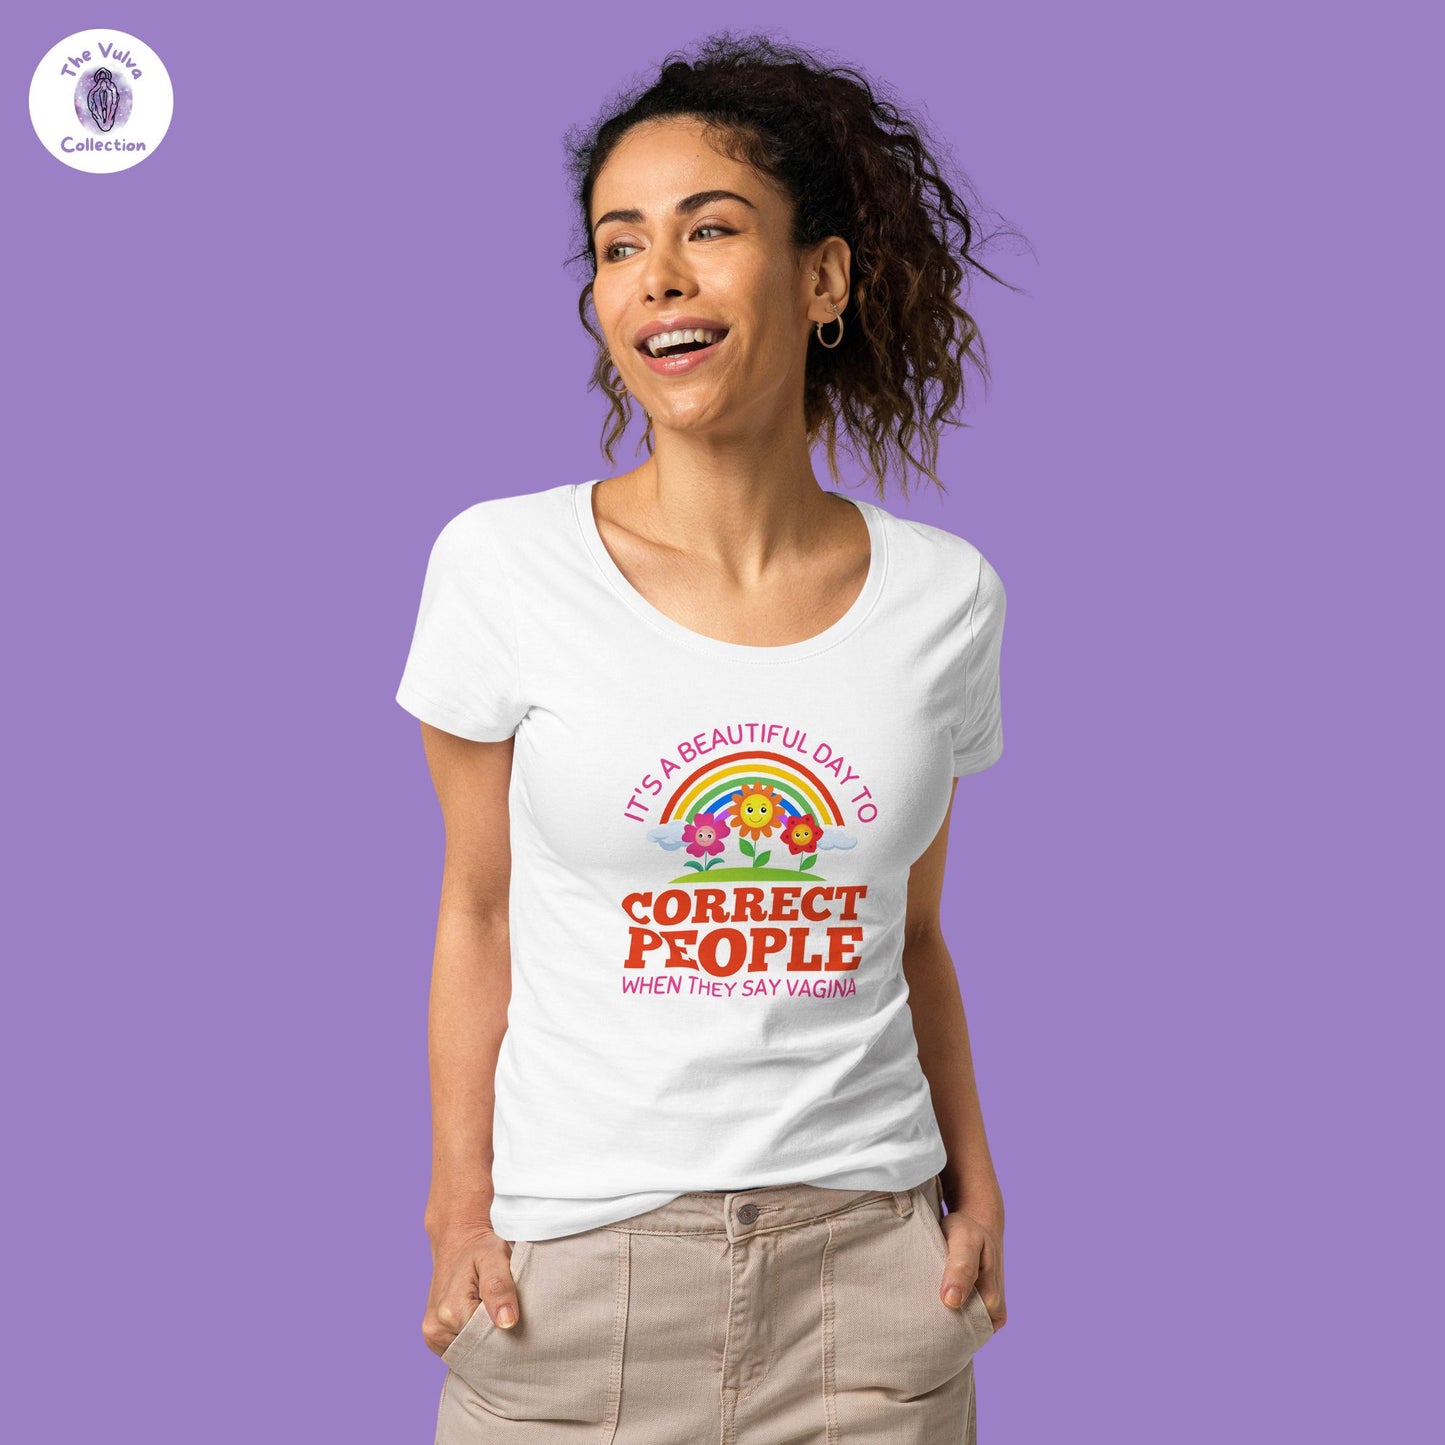 Correct People When They Say Vagina Slim Fit Organic Round Collar T-Shirt